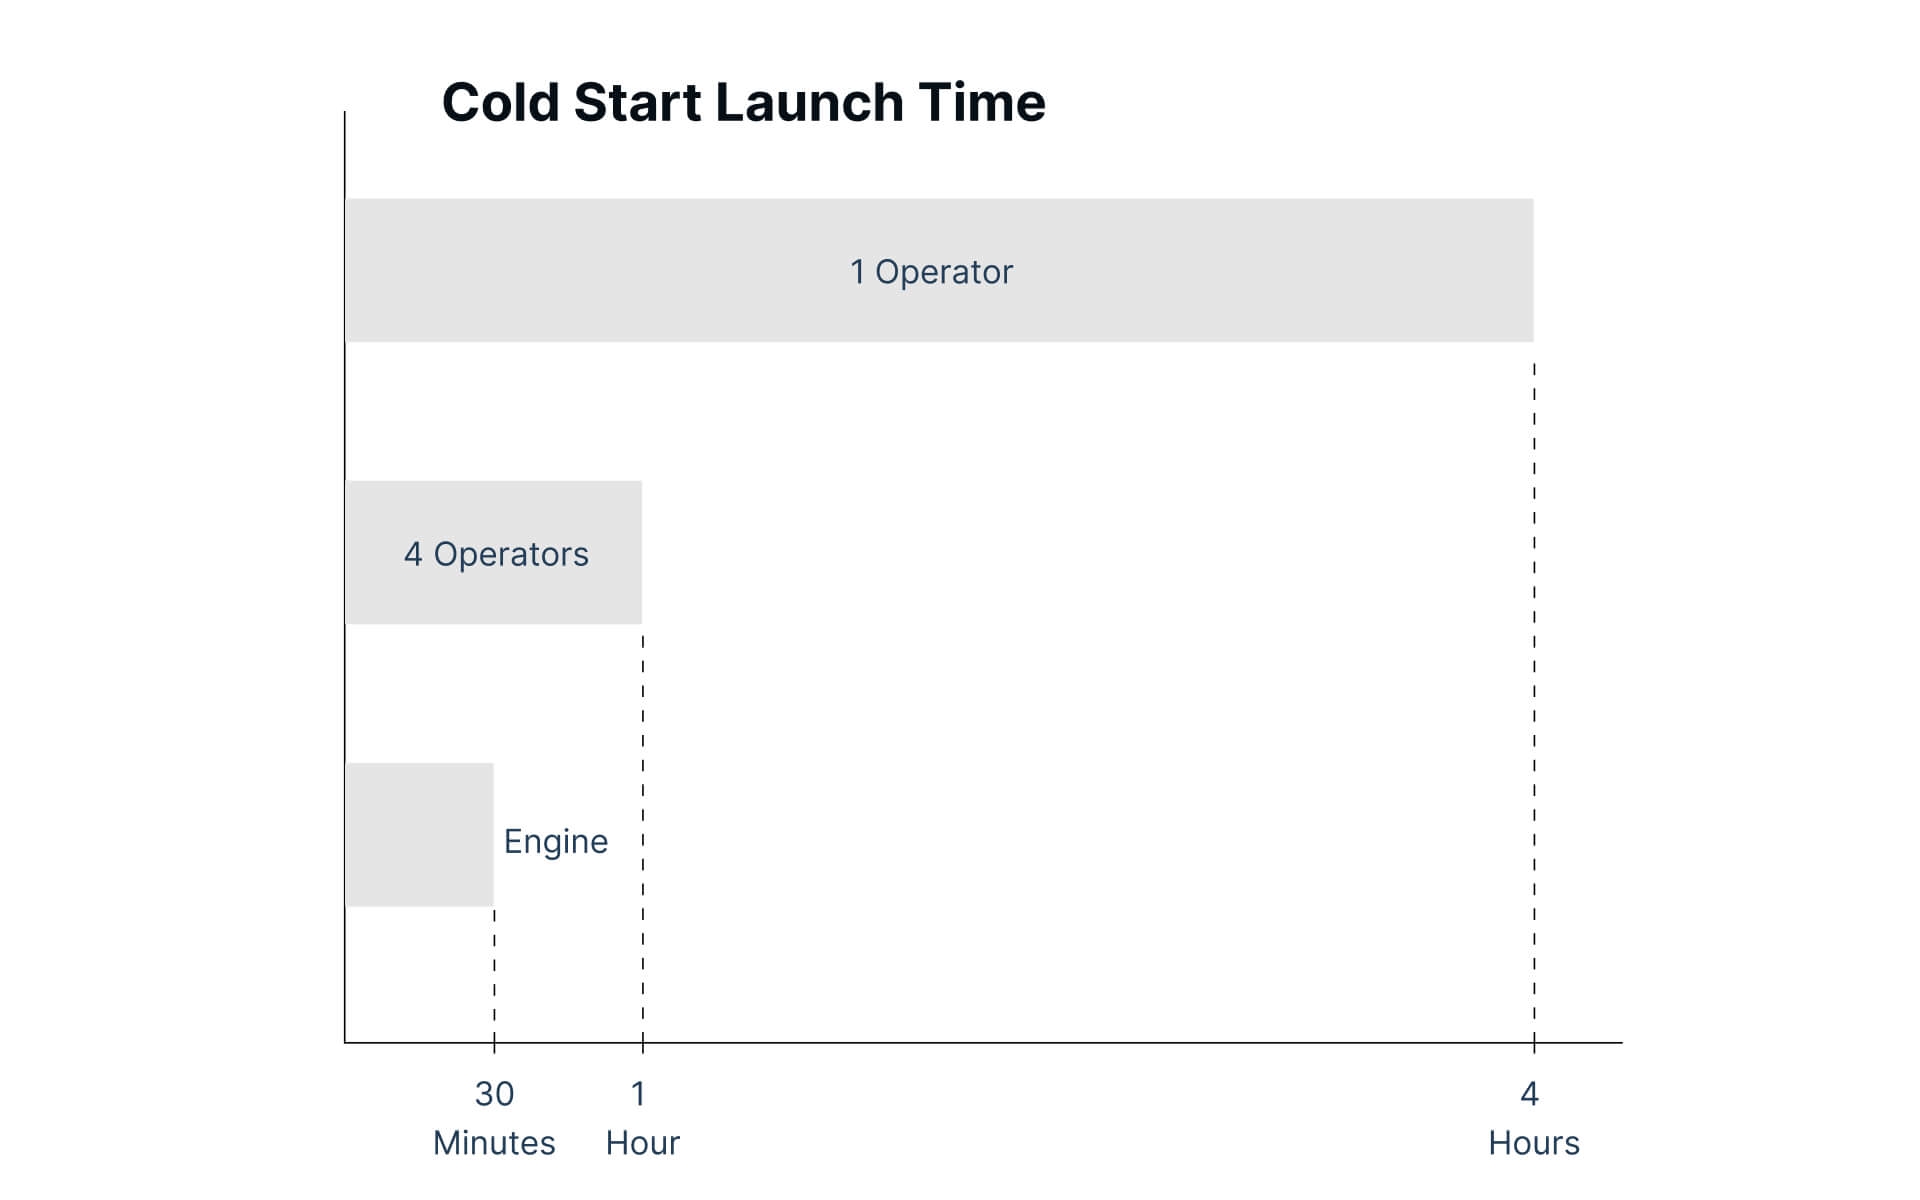 Graph comparing cold start launch times of low-attribution networks: 1 Operator takes 4 hours, 4 Operators take 1 hour, and an Engine takes 30 minutes.